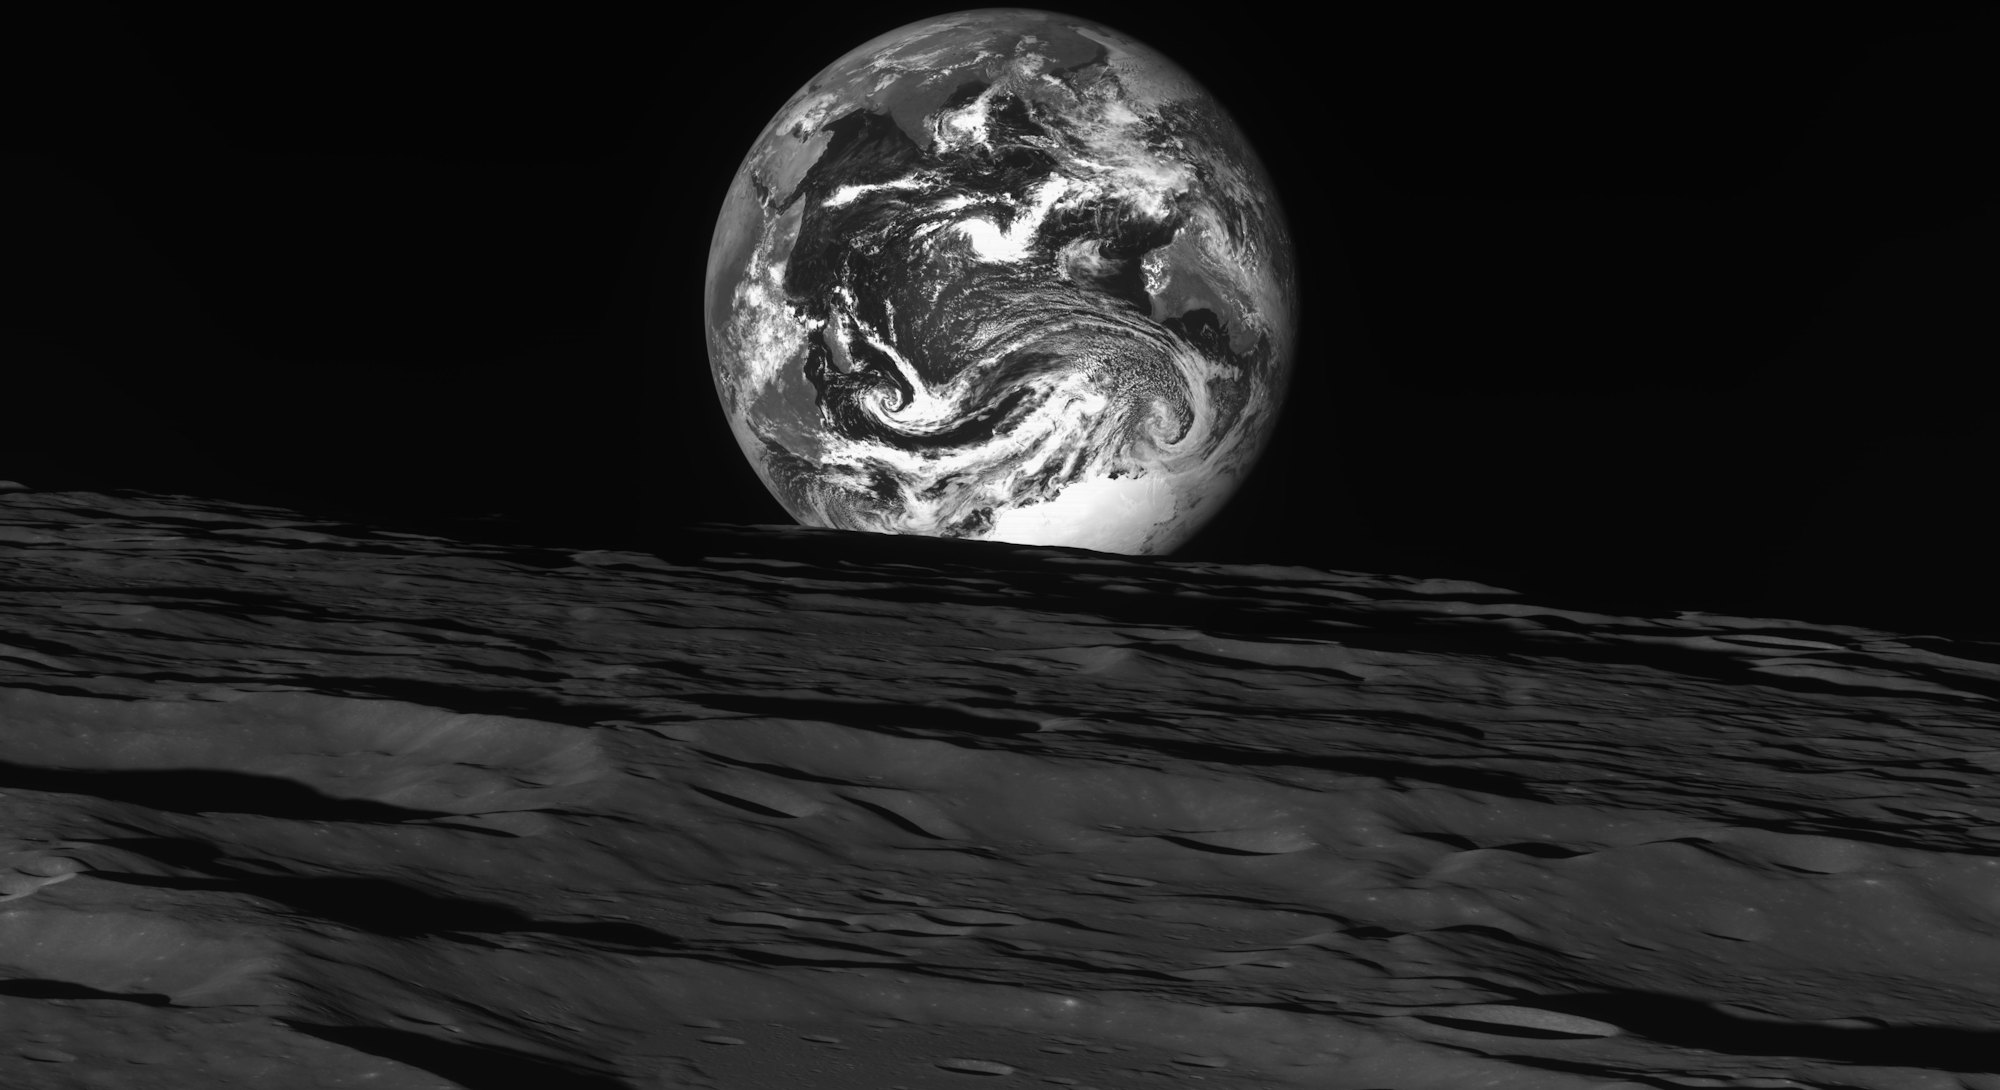 The Earth, appearing as a black and white marble with streaks of clouds across its atmosphere, peeks...